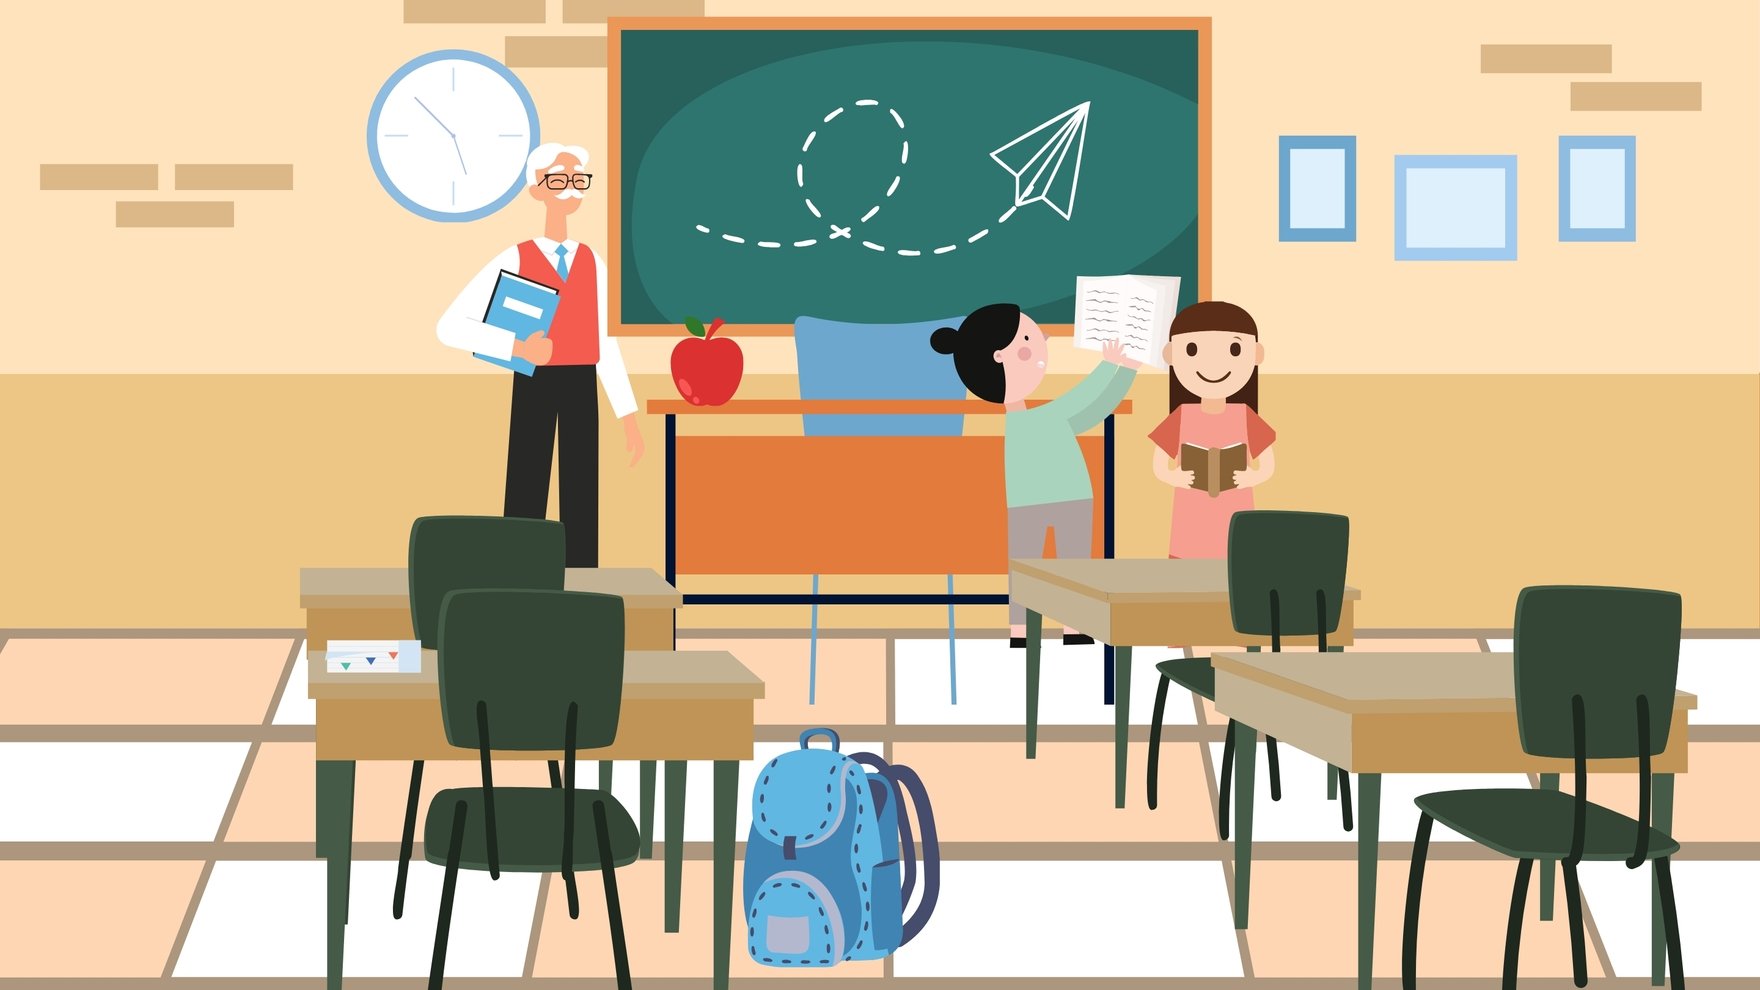 Classroom Background - Images, HD, Free, Download 